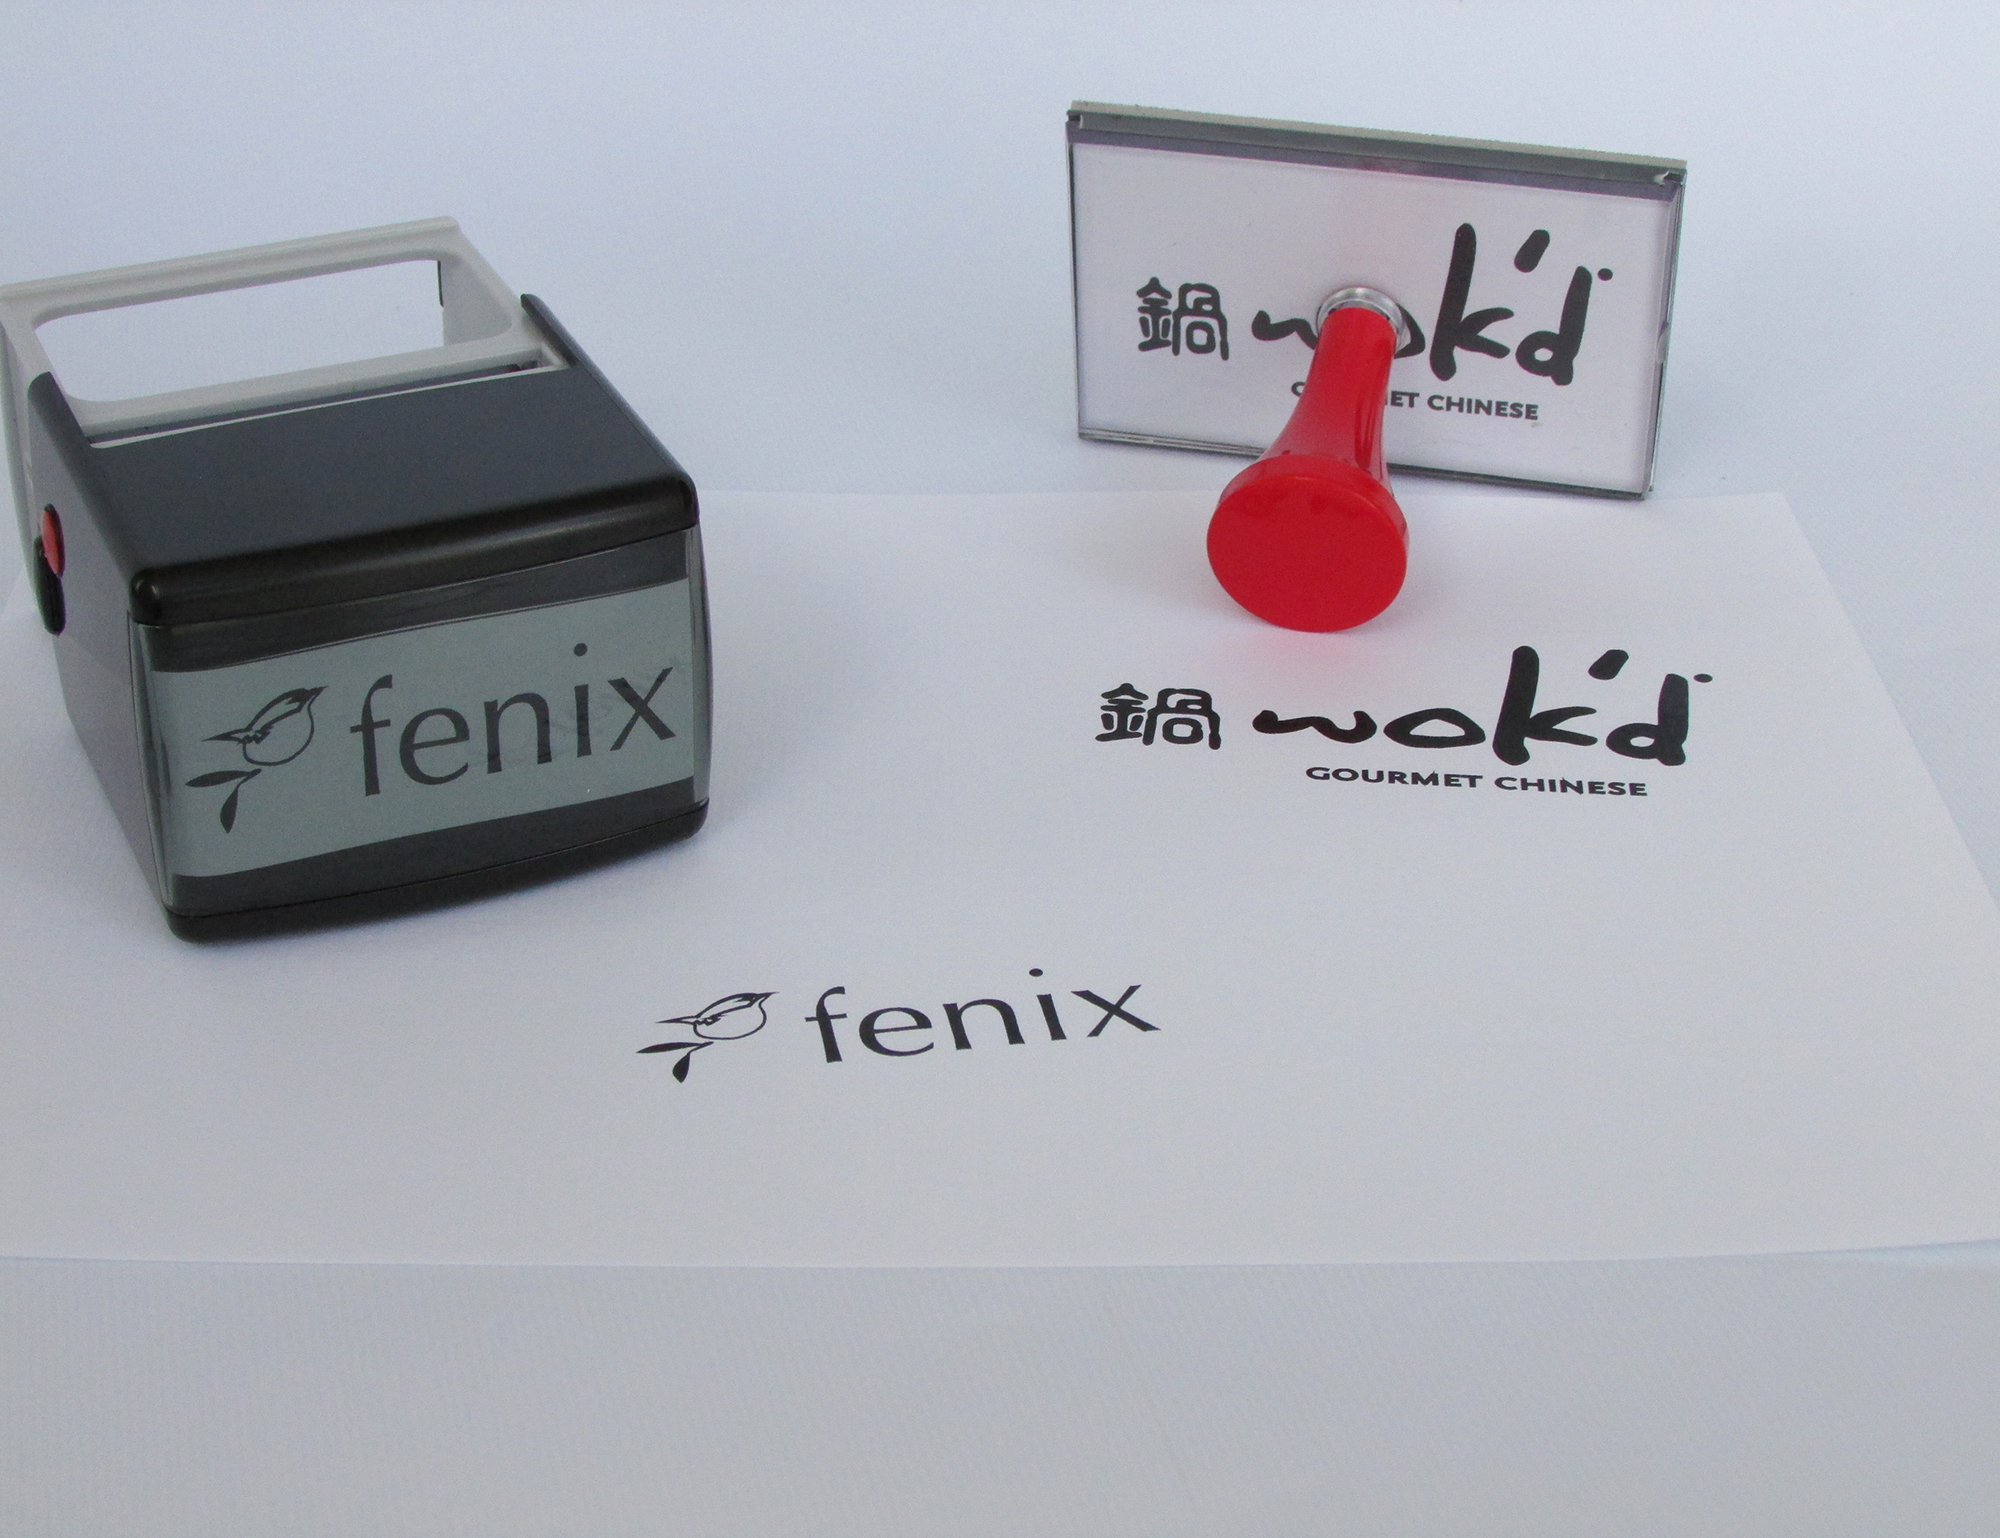 Self-inking and rubber handle stamps